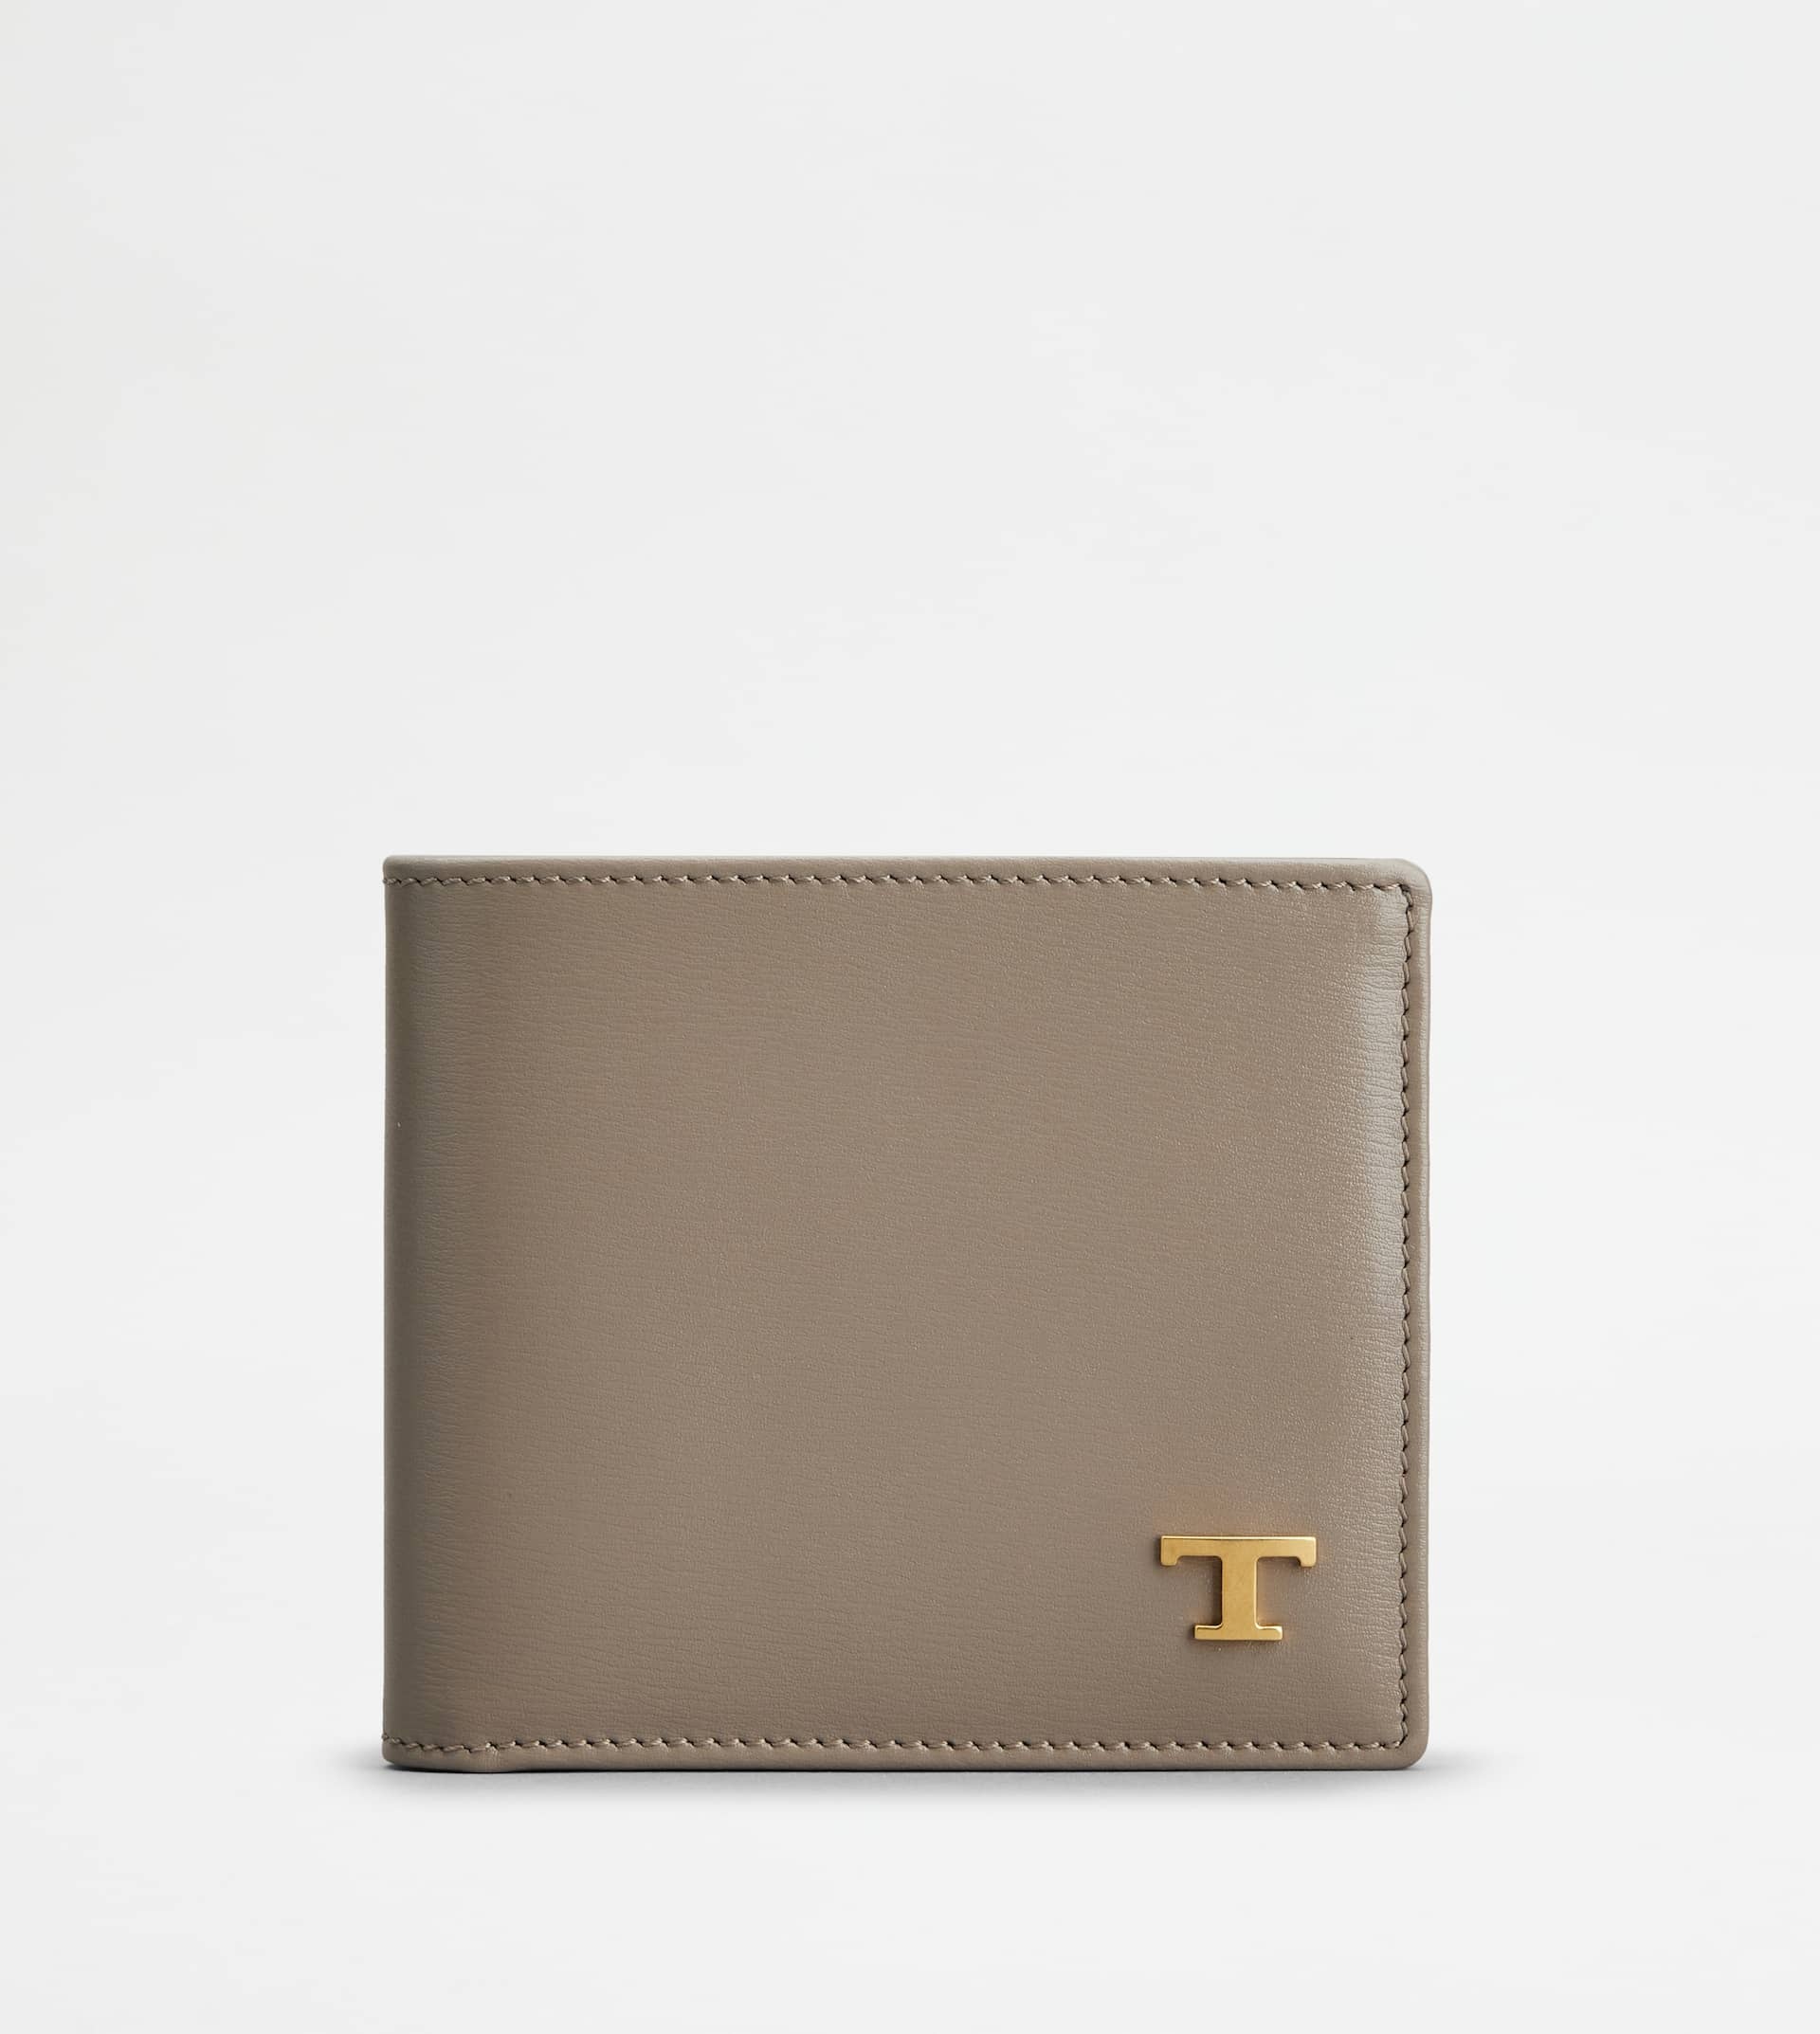 TOD'S WALLET IN LEATHER - GREY - 1